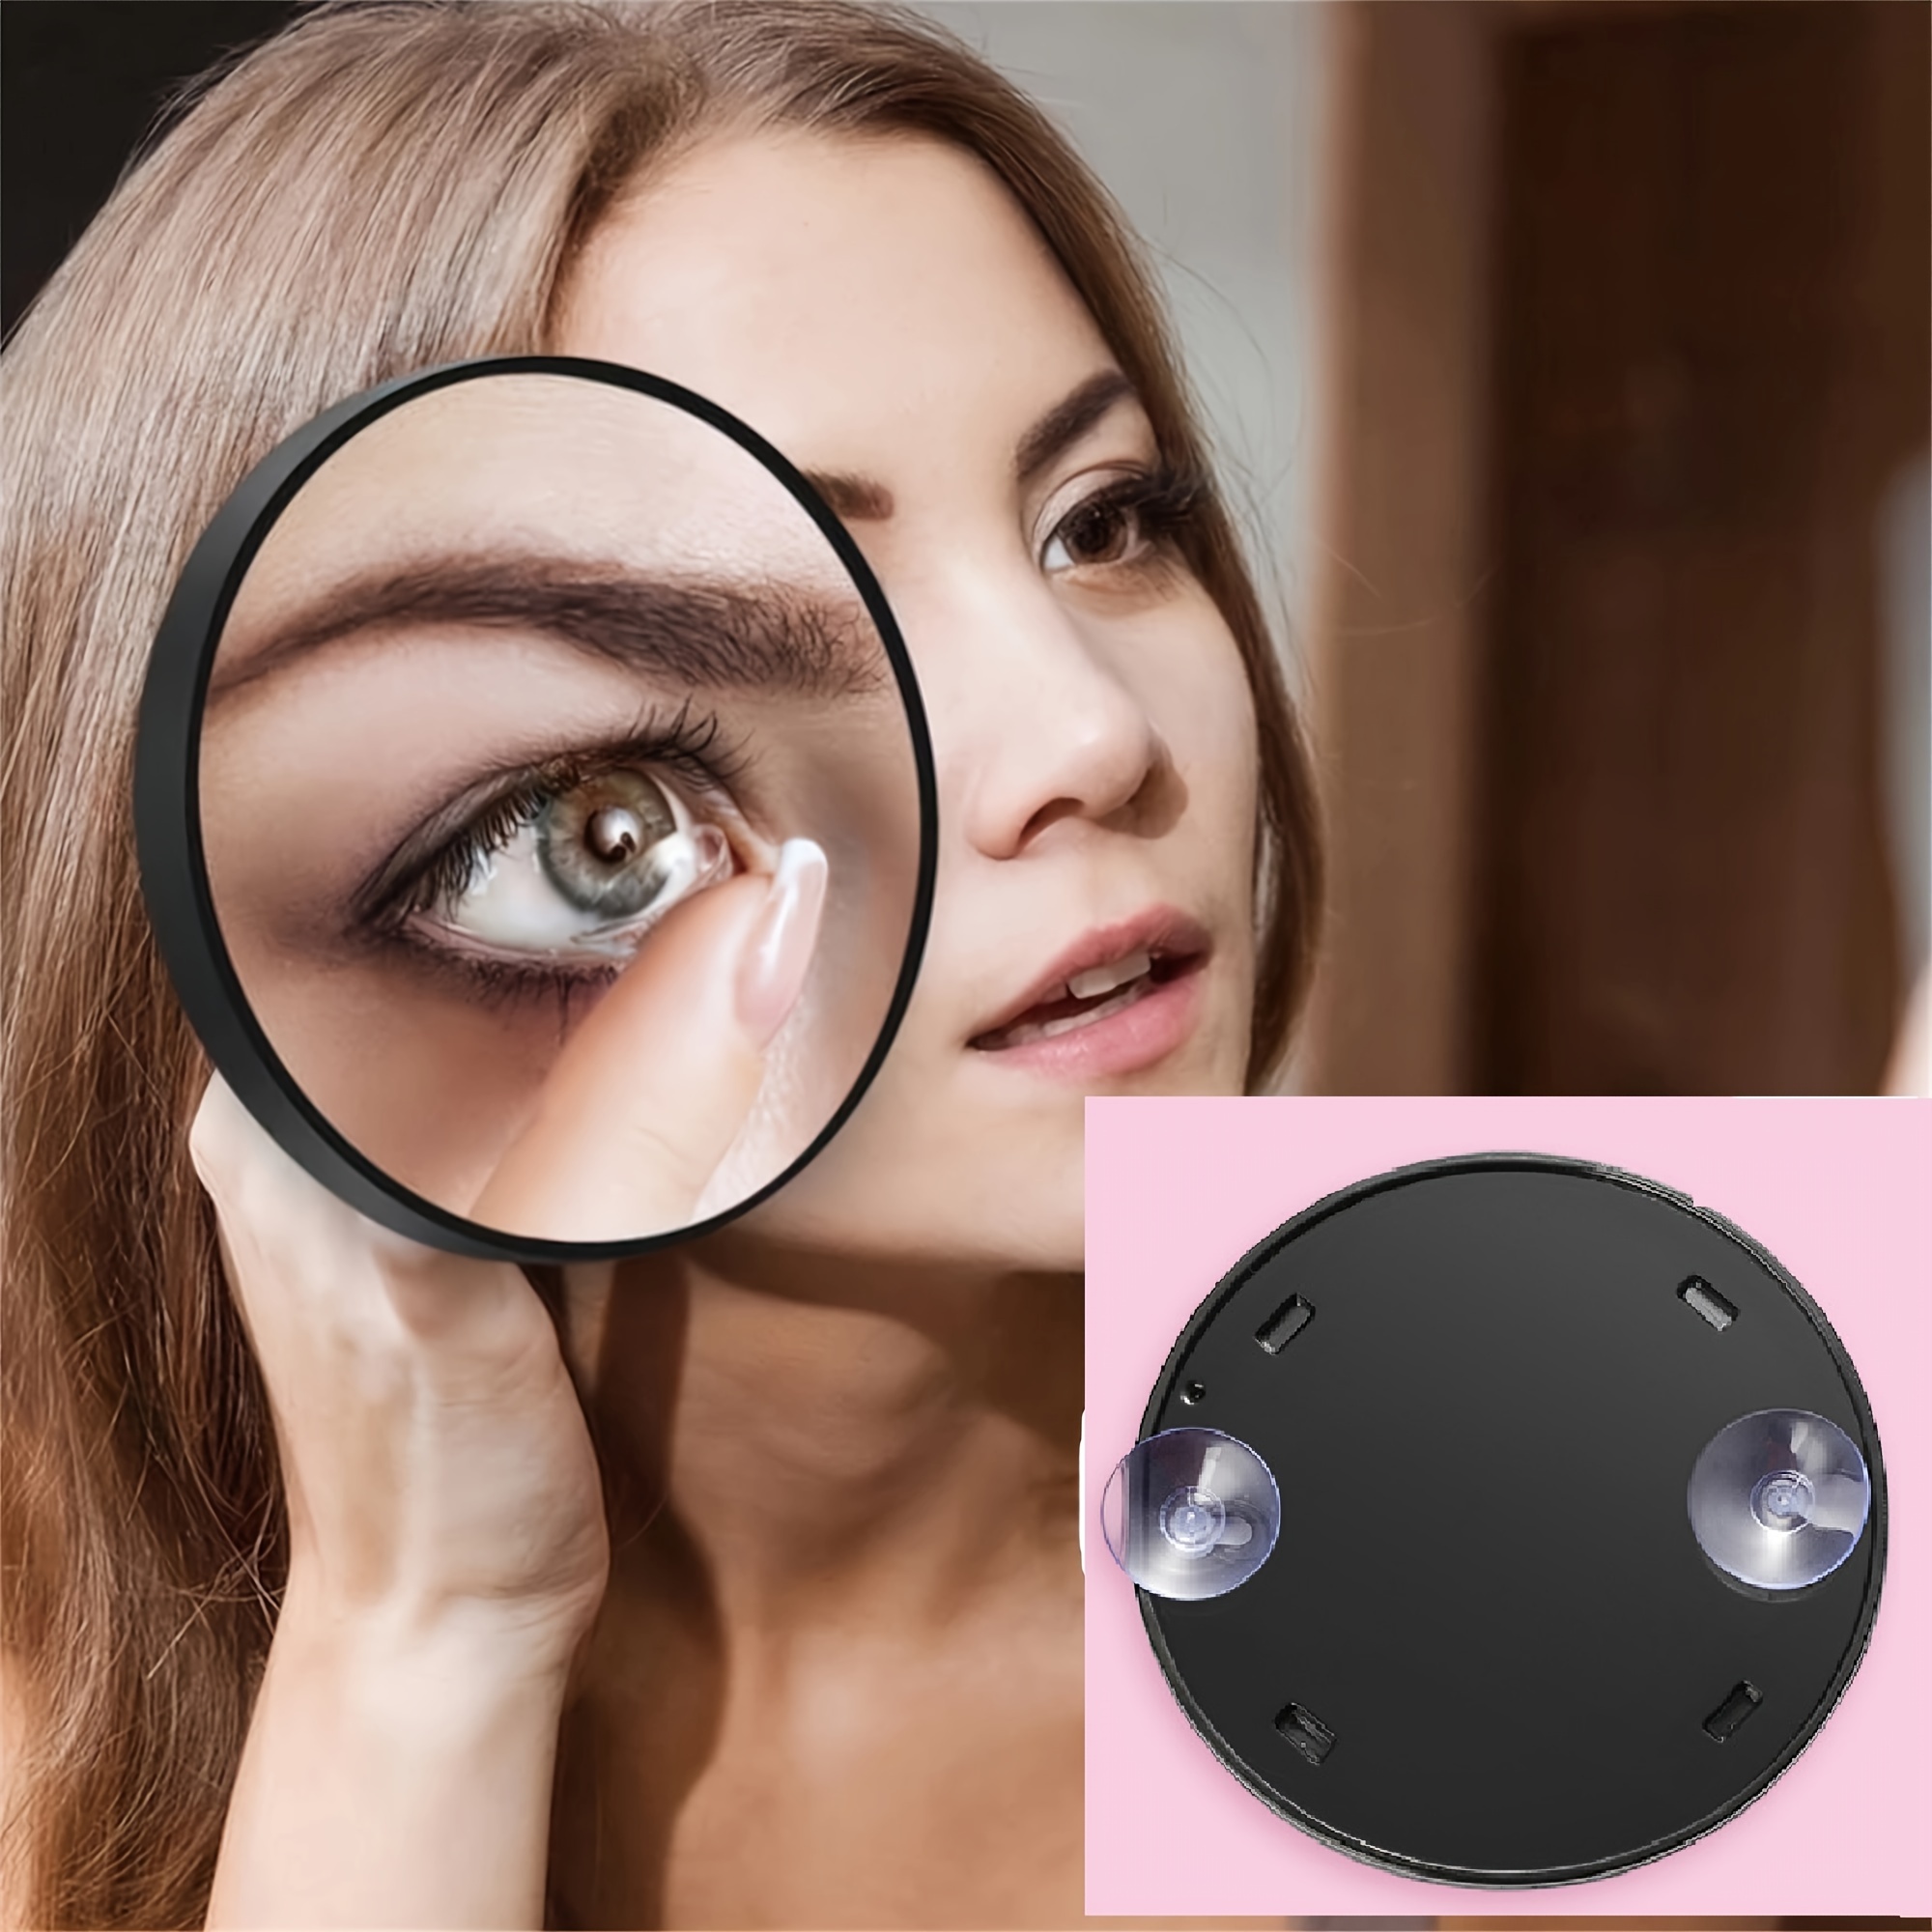 

1pc 10x/5x Magnifying Suction Cup Mirror, Easy Install, Versatile Bathroom And Makeup Accessory, Compact Travel Size